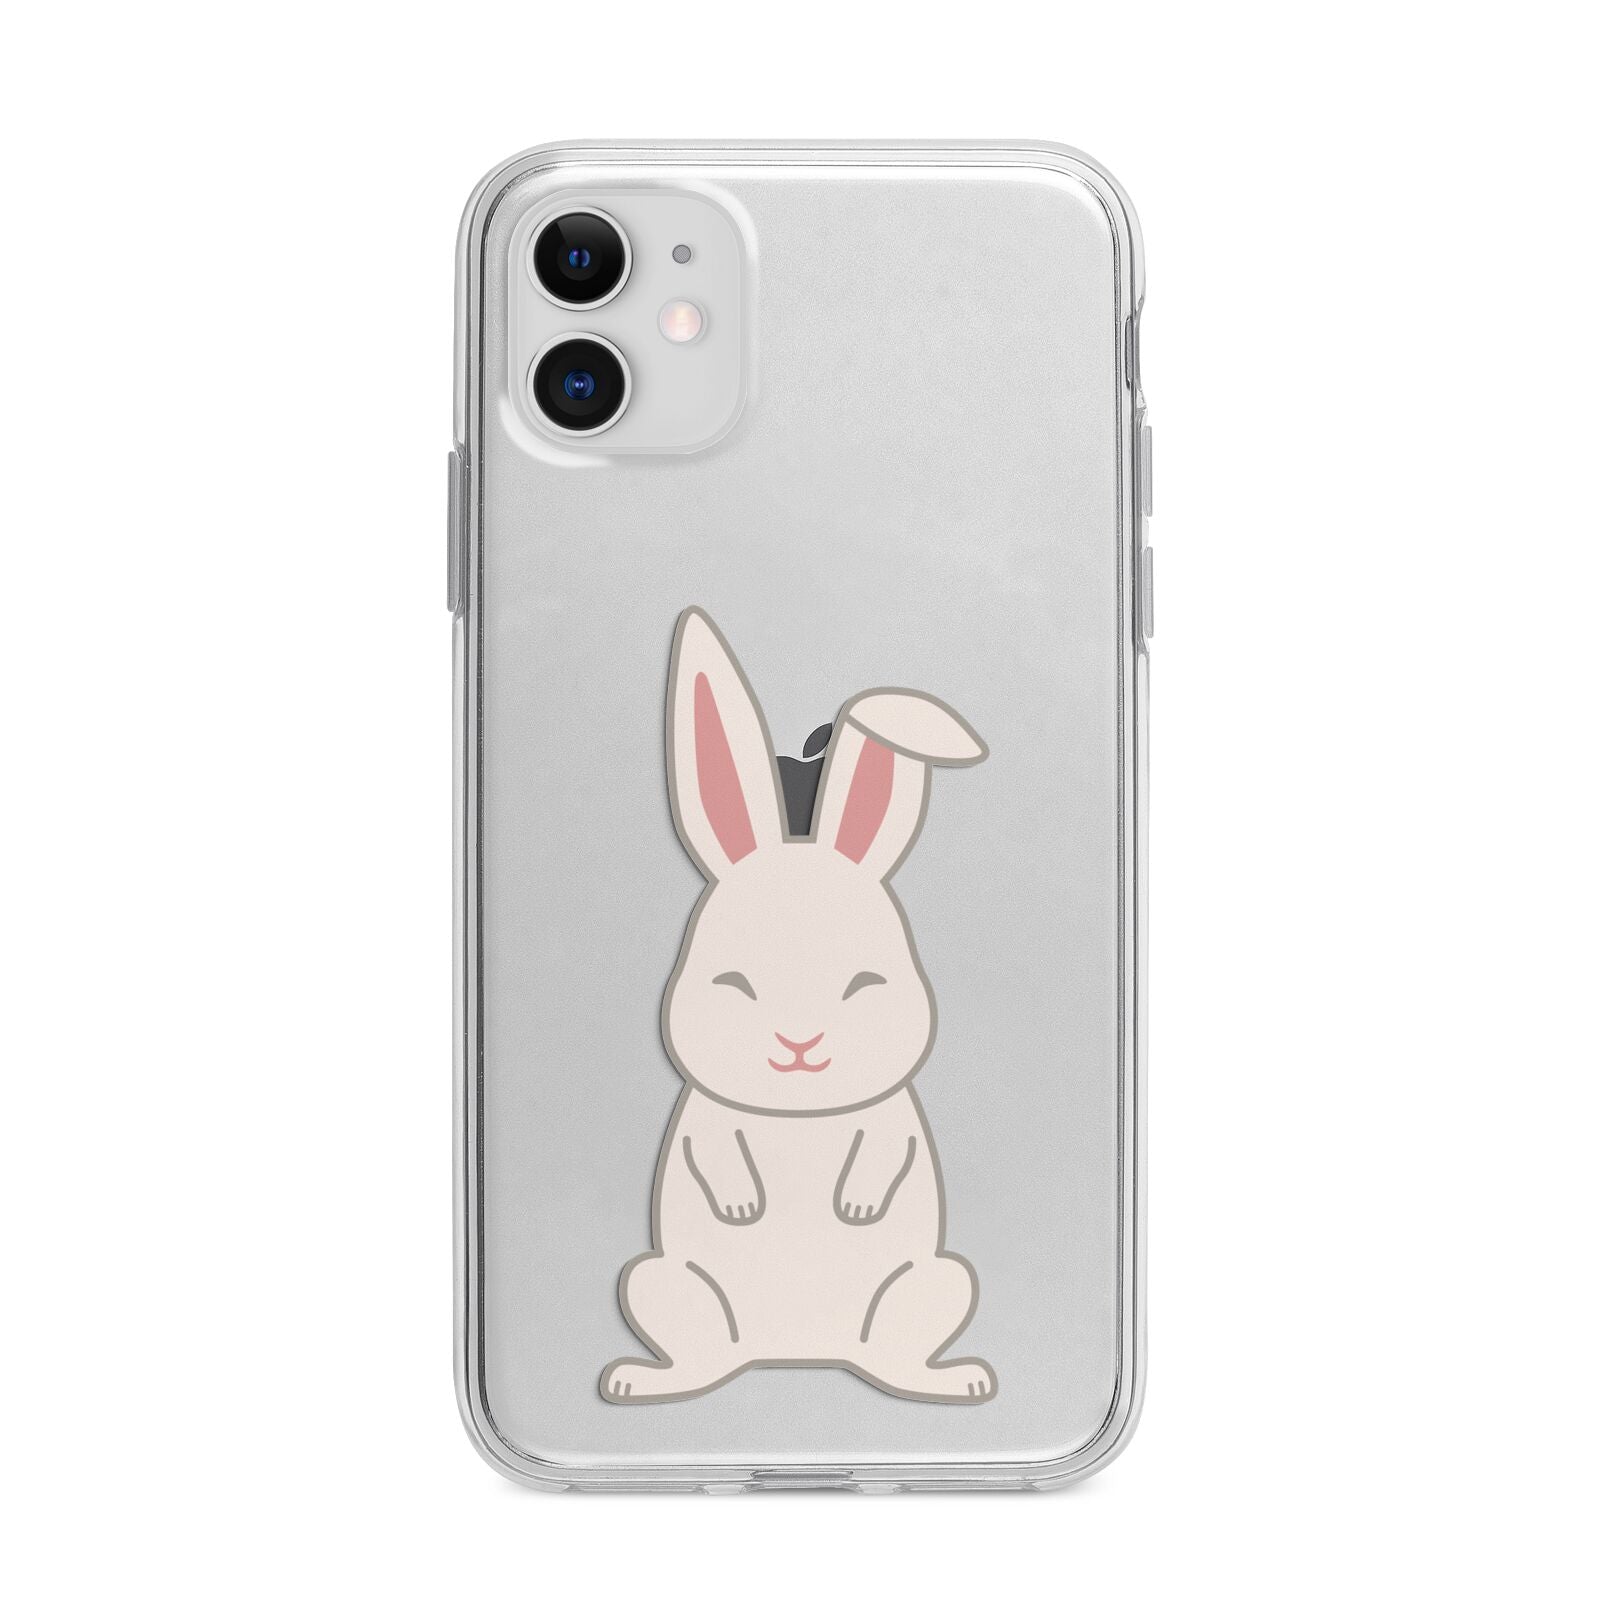 Bunny Apple iPhone 11 in White with Bumper Case